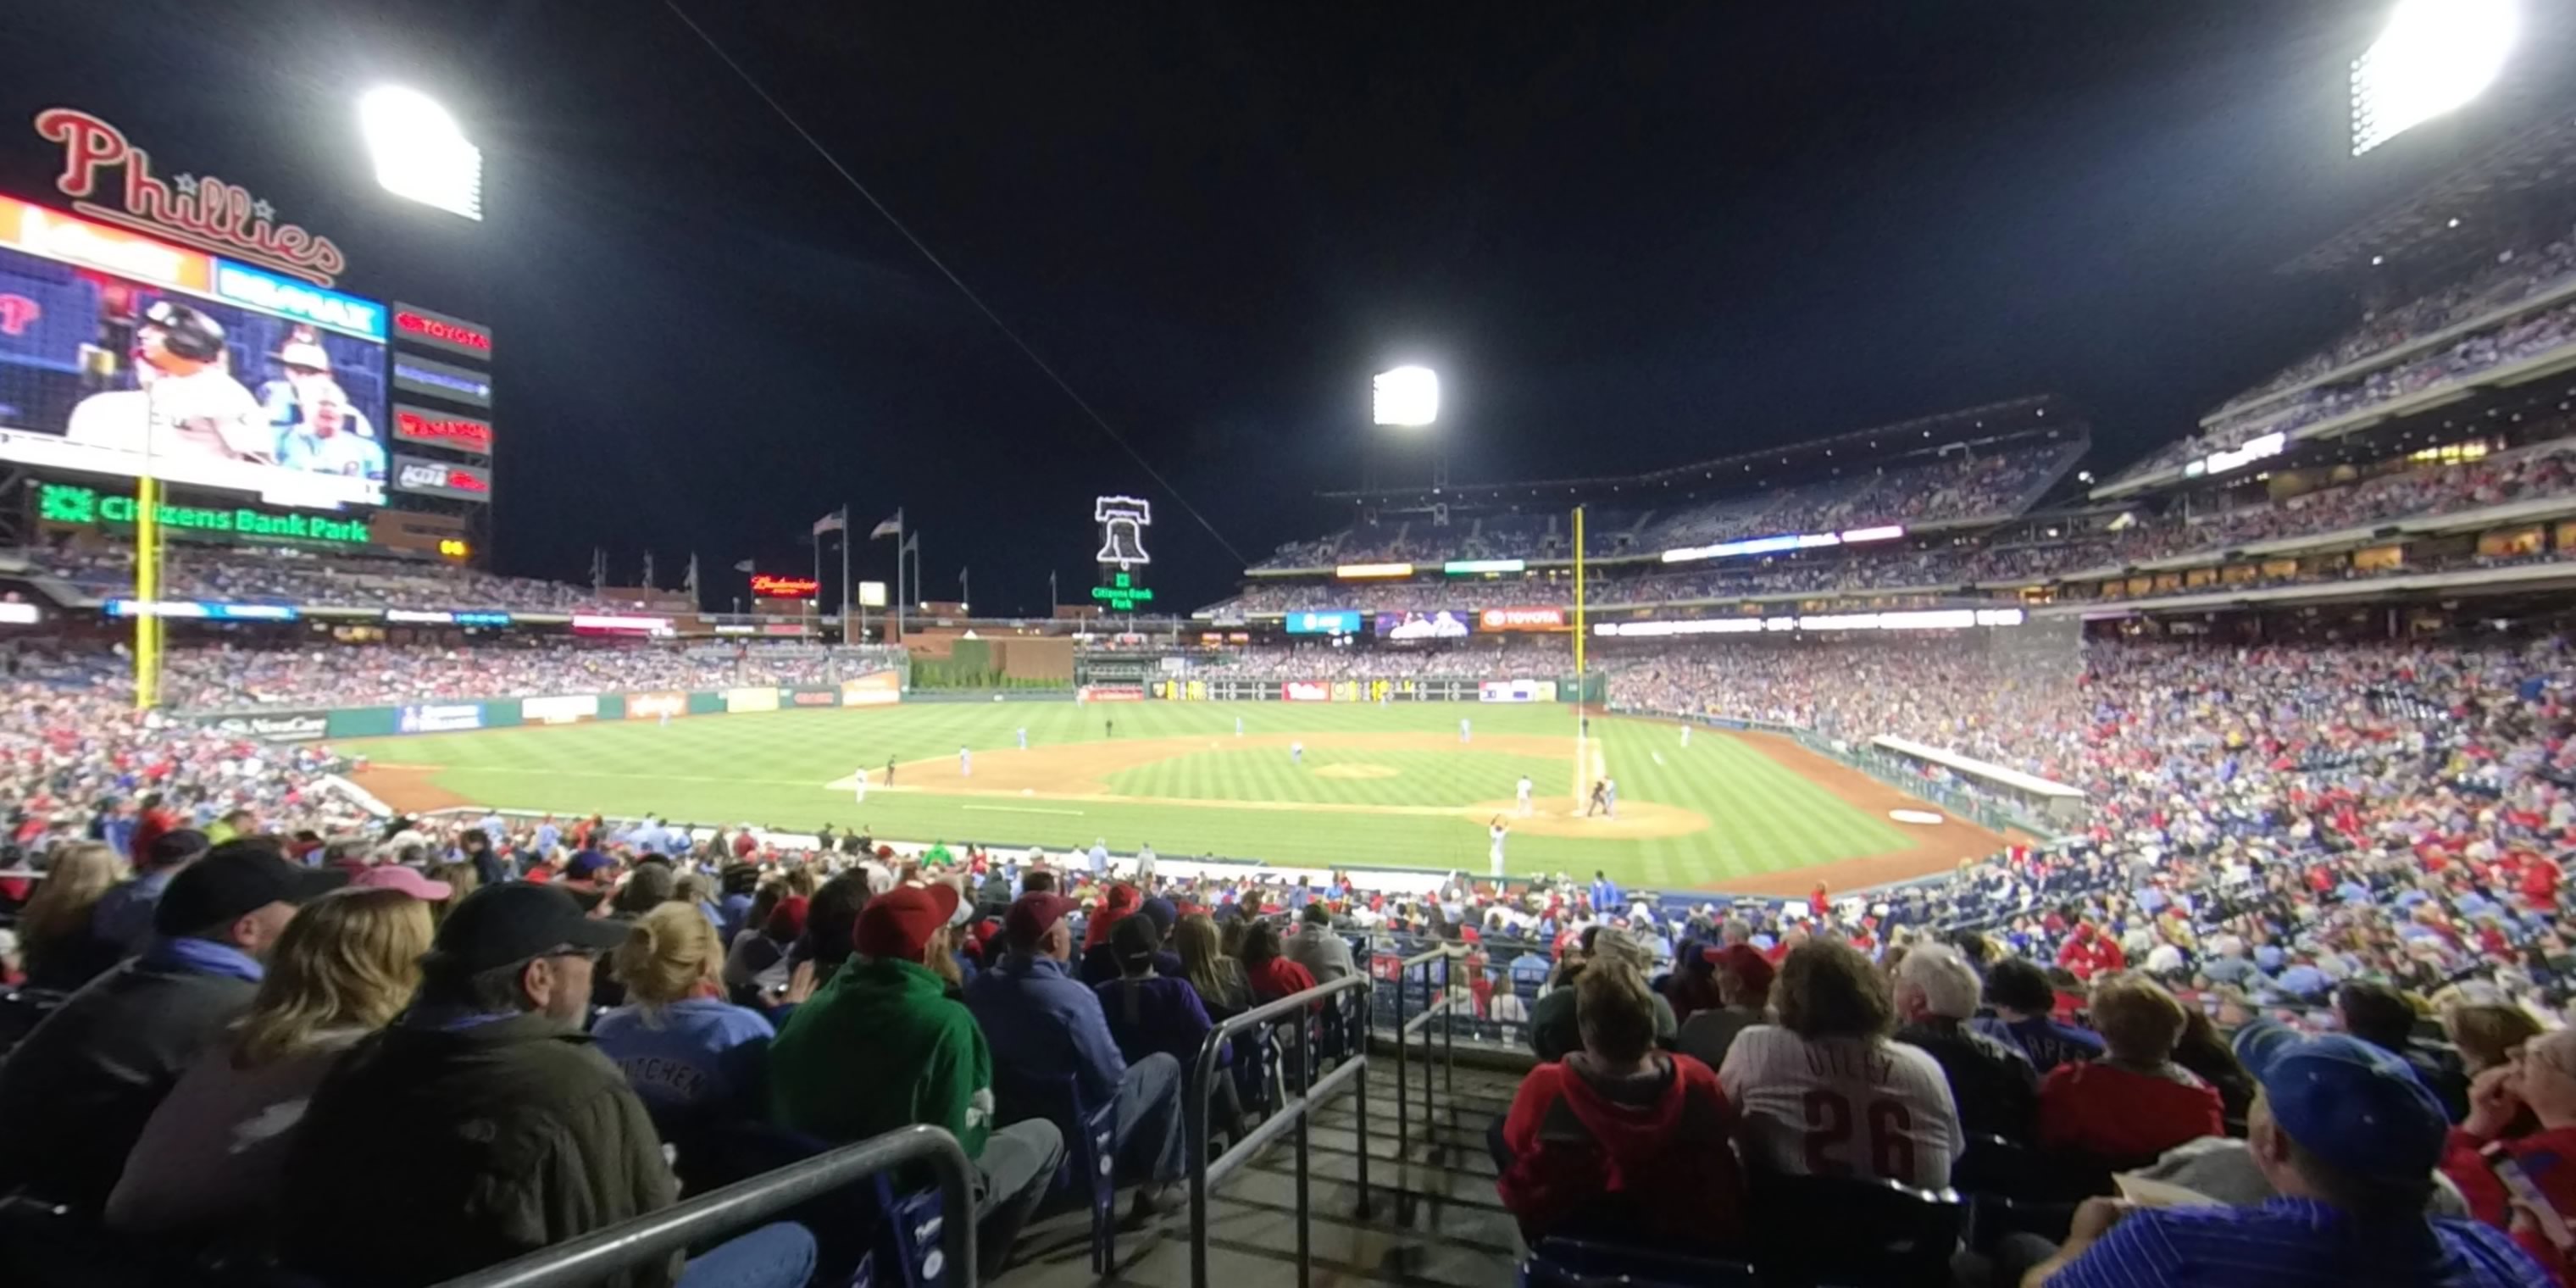 section 127 panoramic seat view  for baseball - citizens bank park